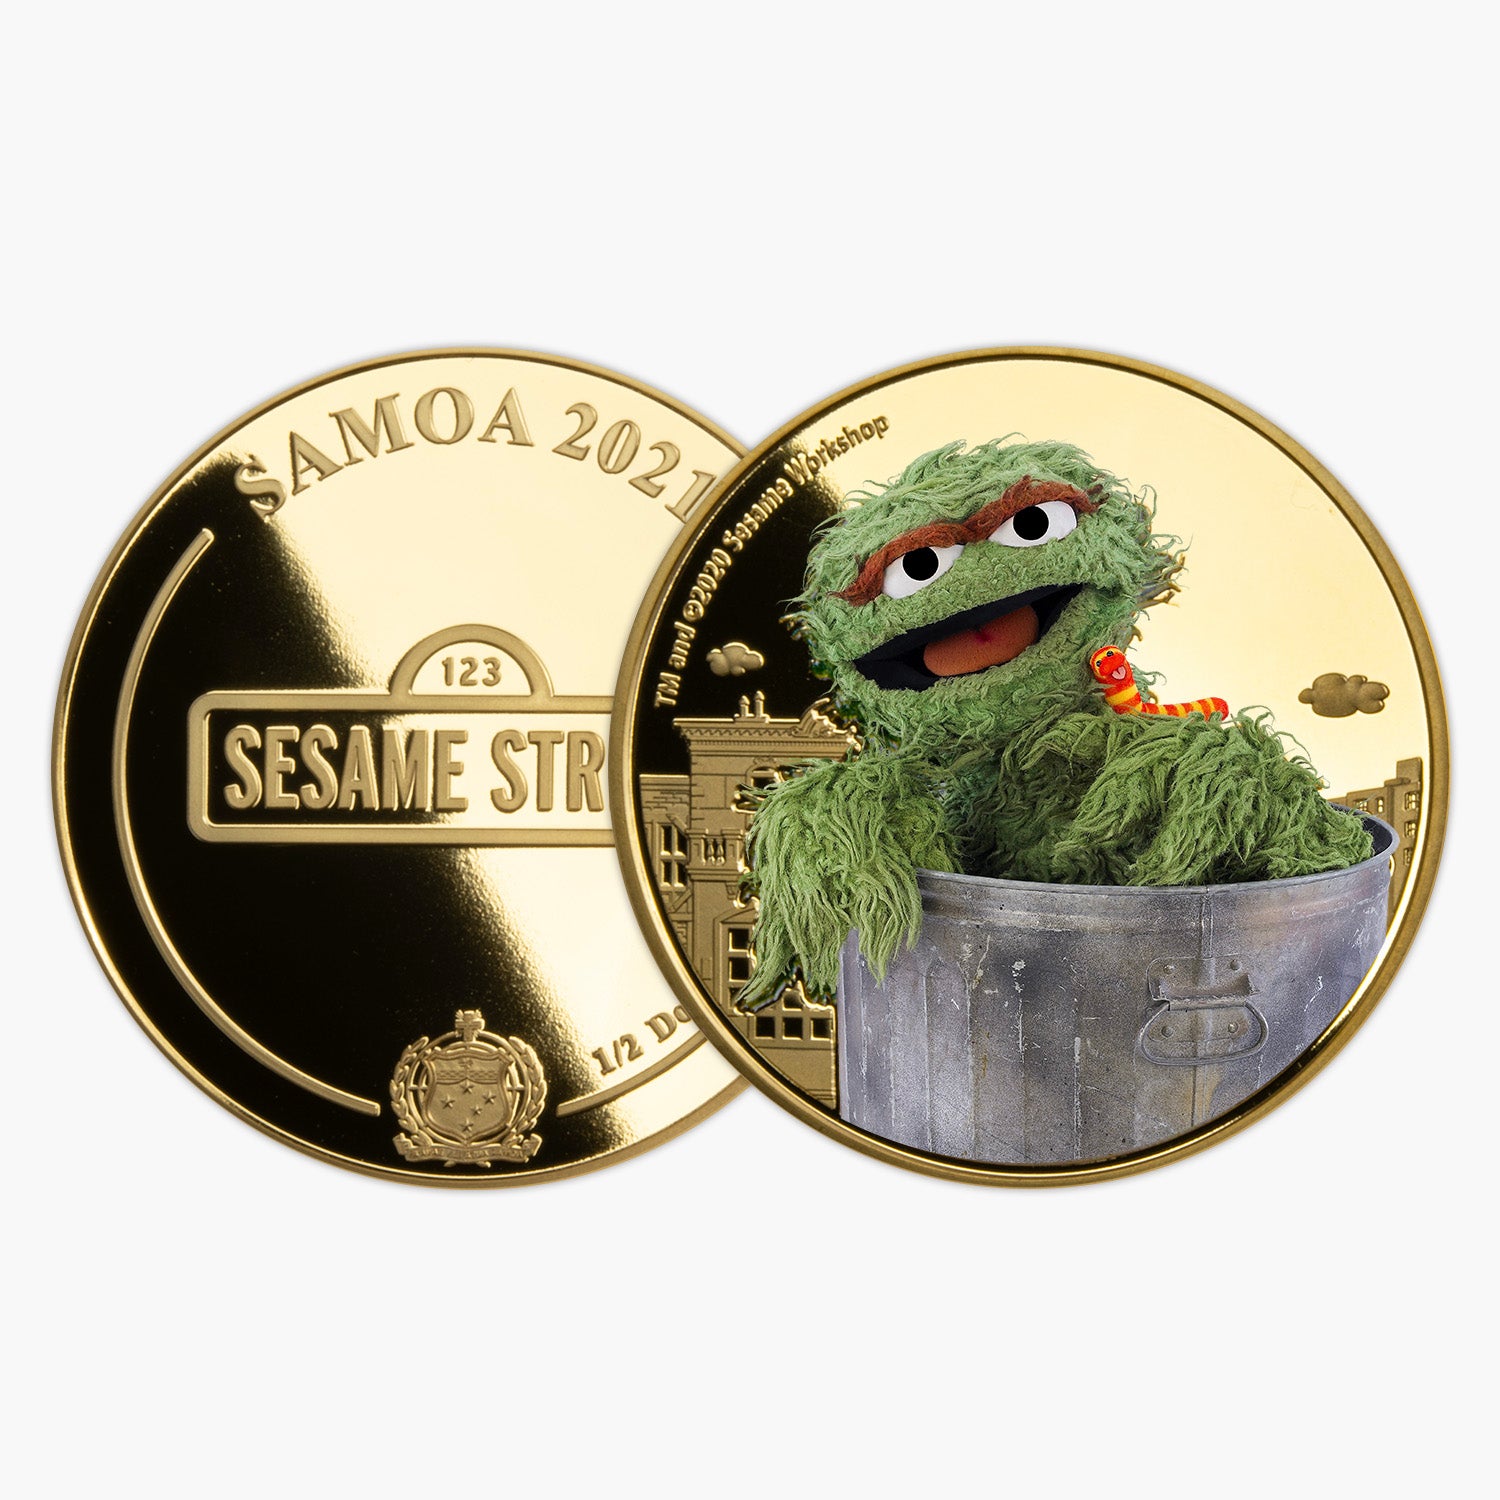 The Complete 2021 Sesame Street Coin Collection